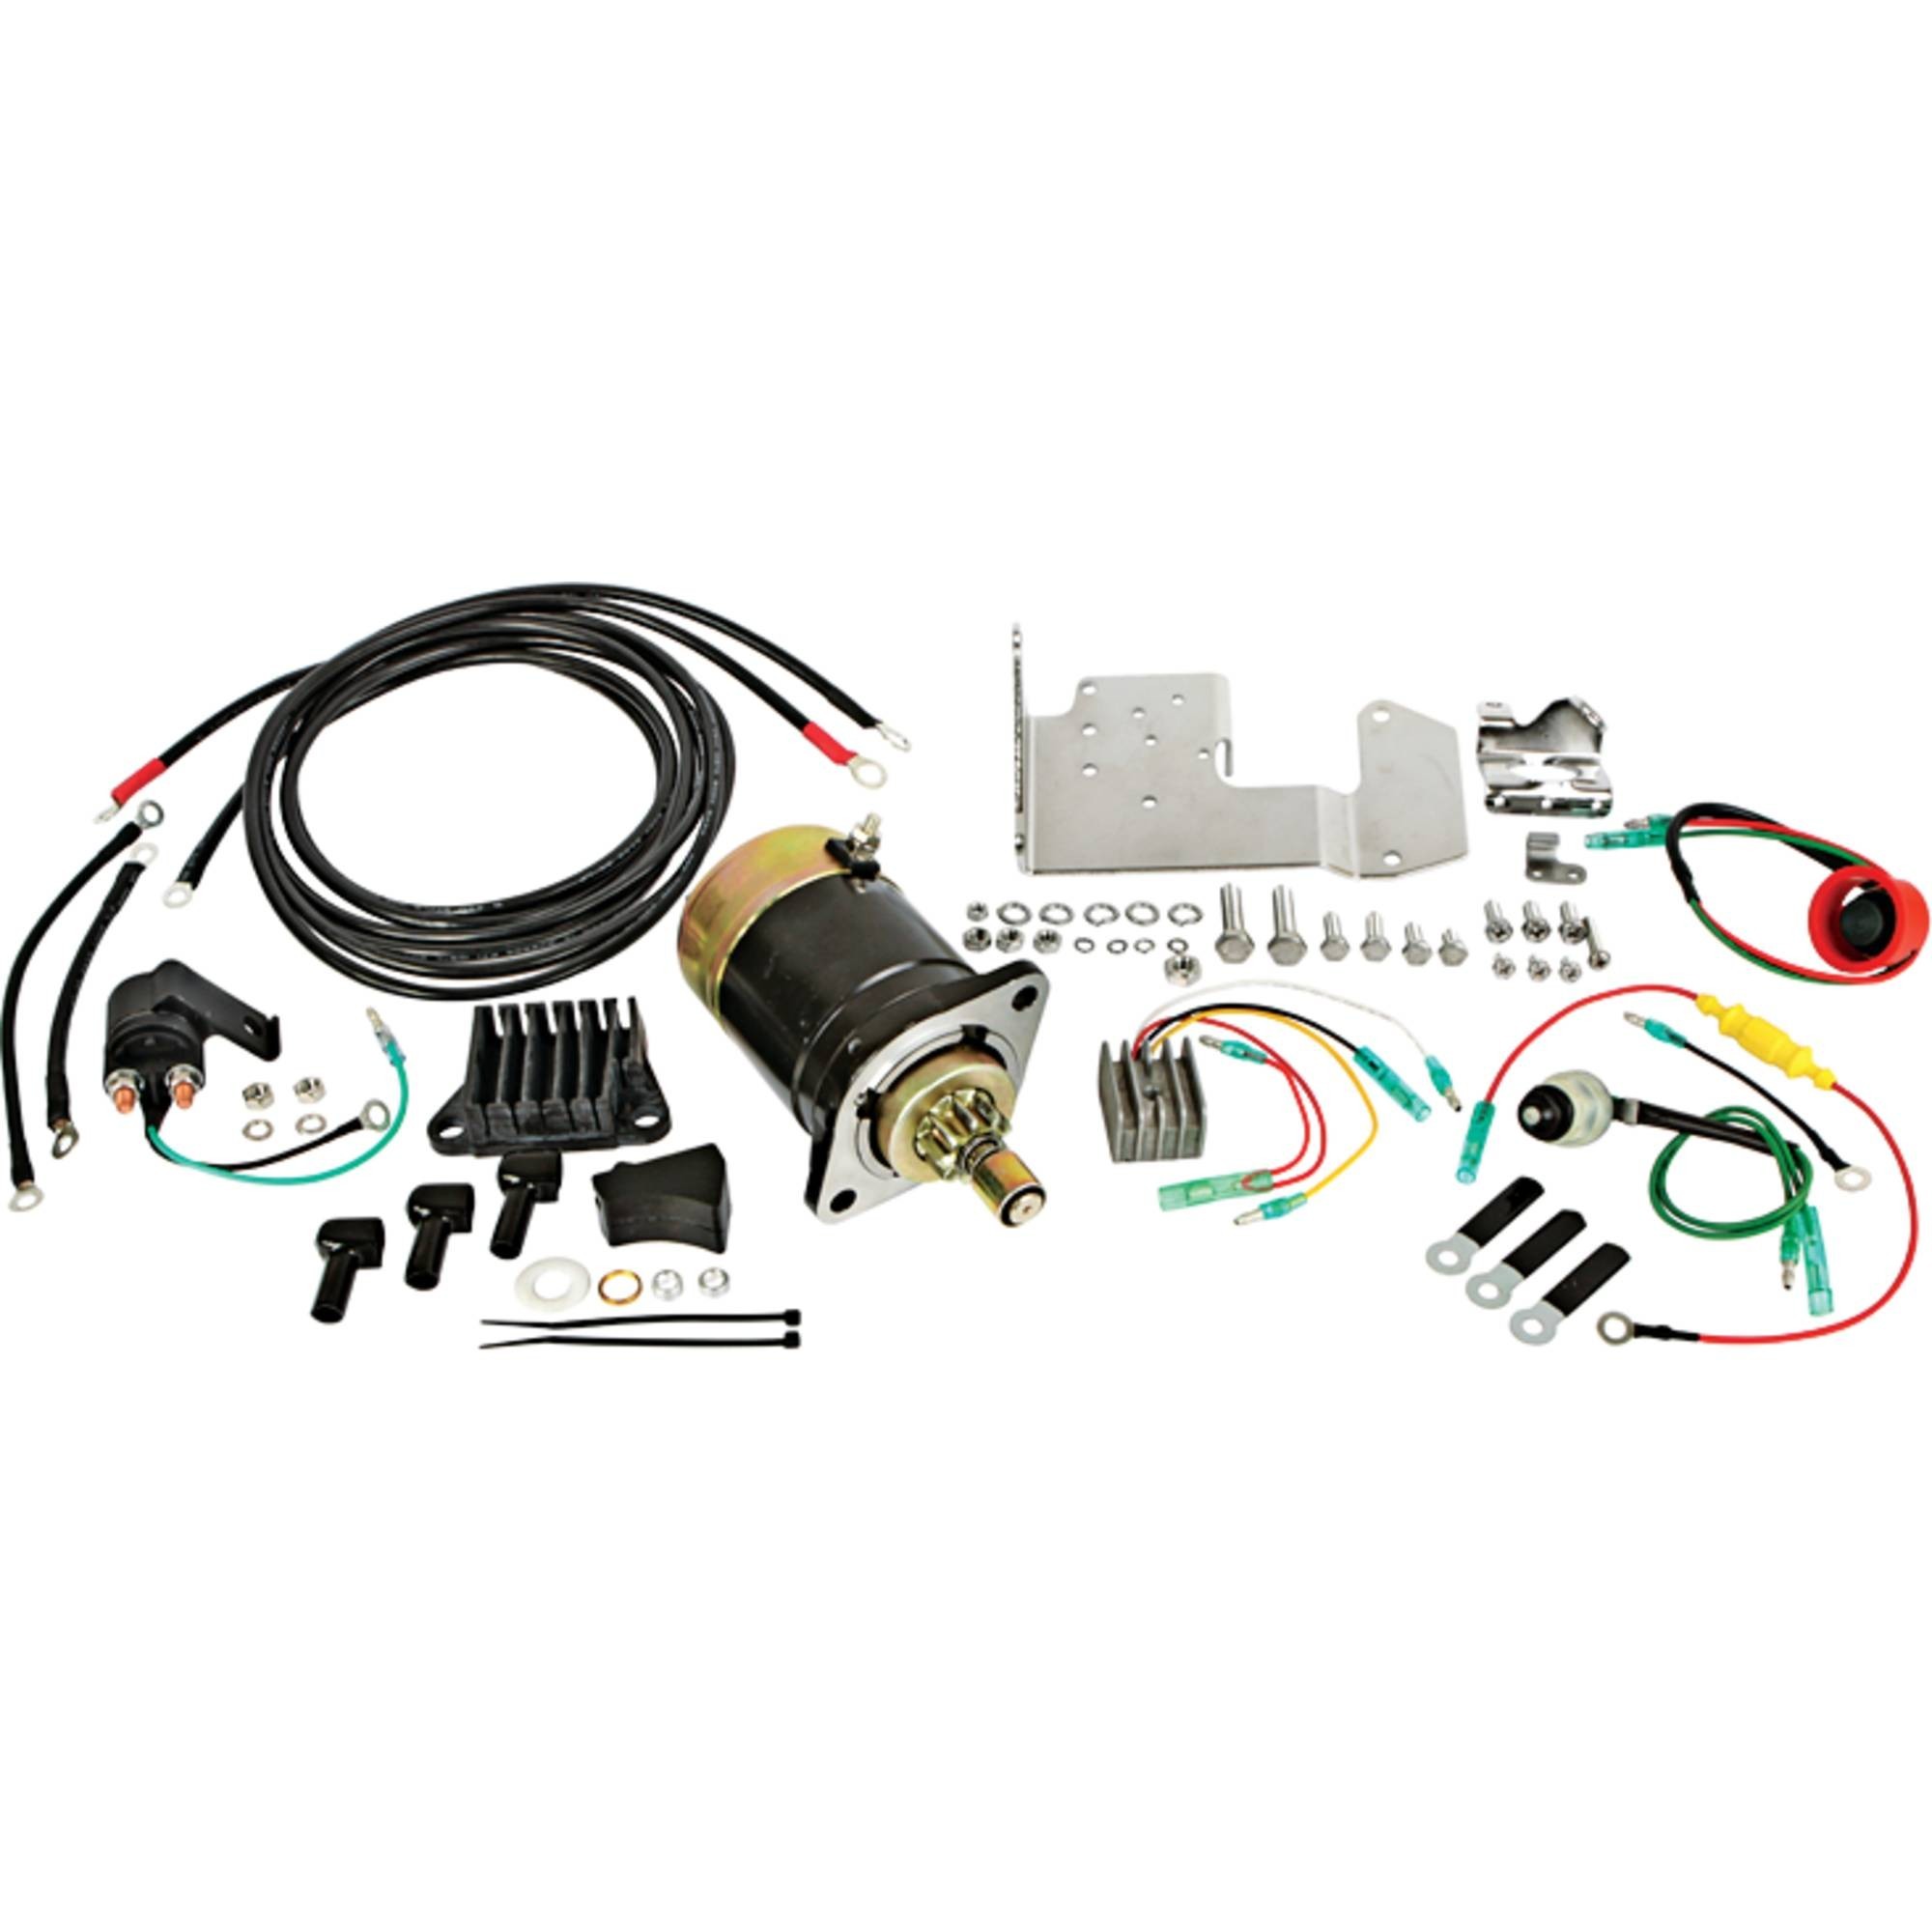 DB Electrical New Electric Engine Start Kit for Nissan & Touatsu 25, 30 Outboard, Mercury 30HP